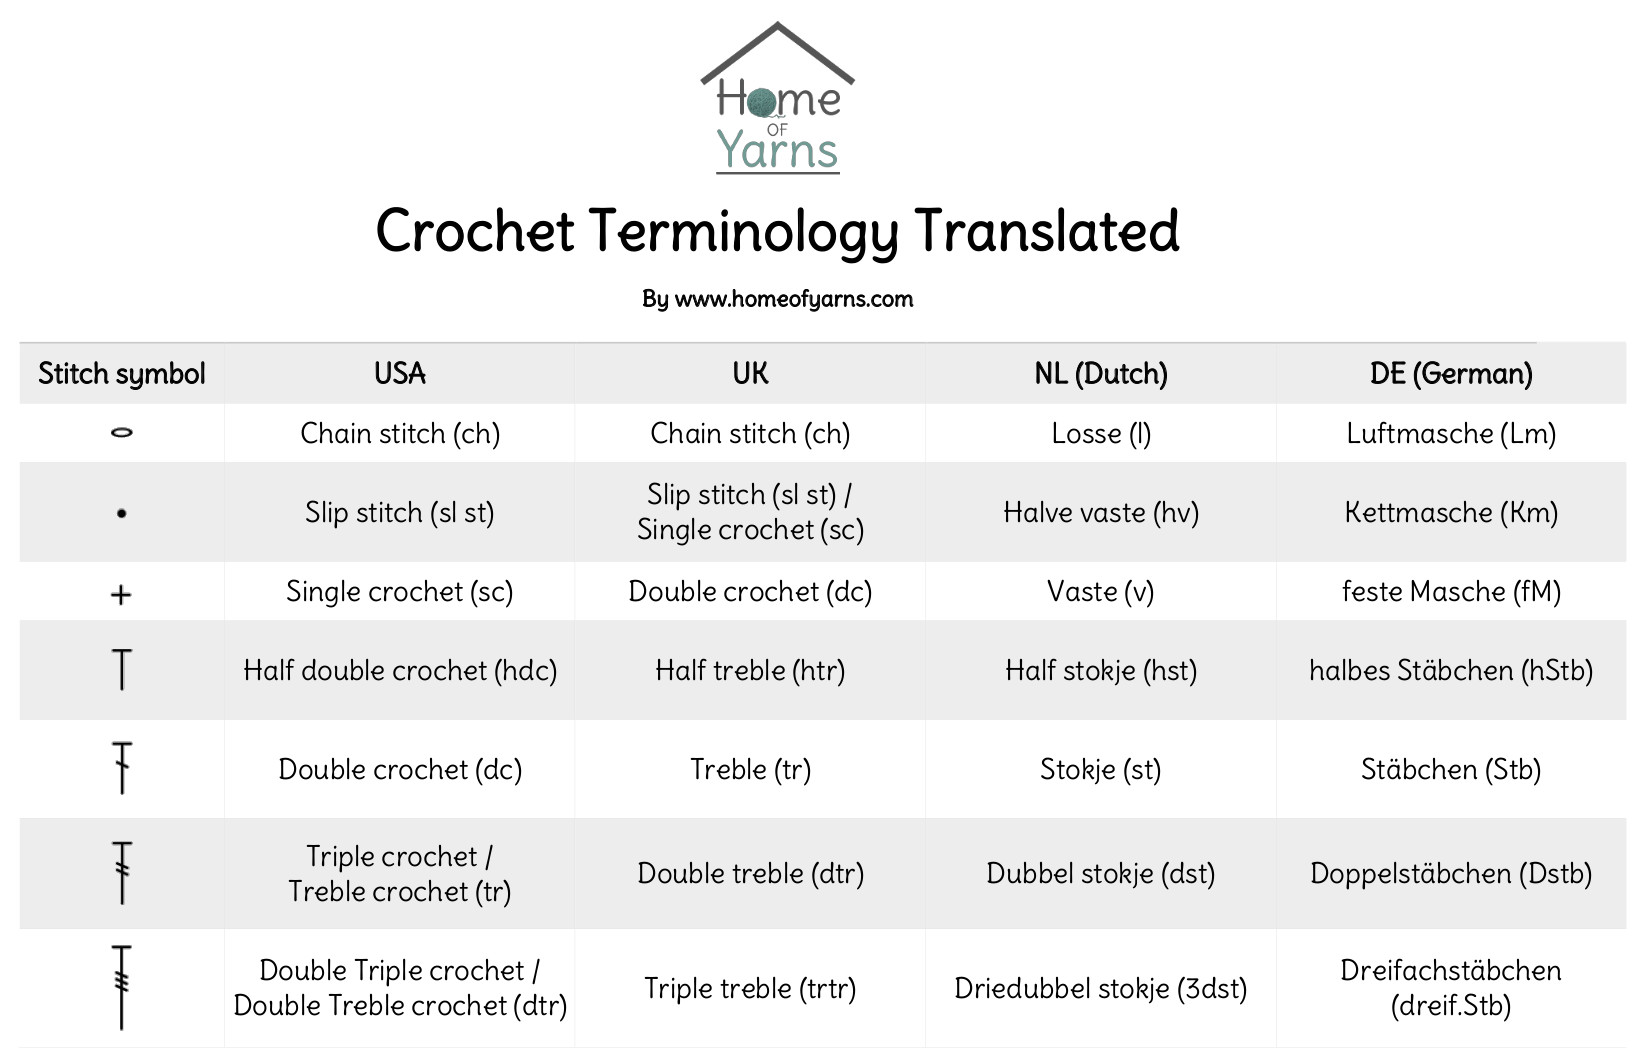 Crochet terminology stitch names and abbreviations